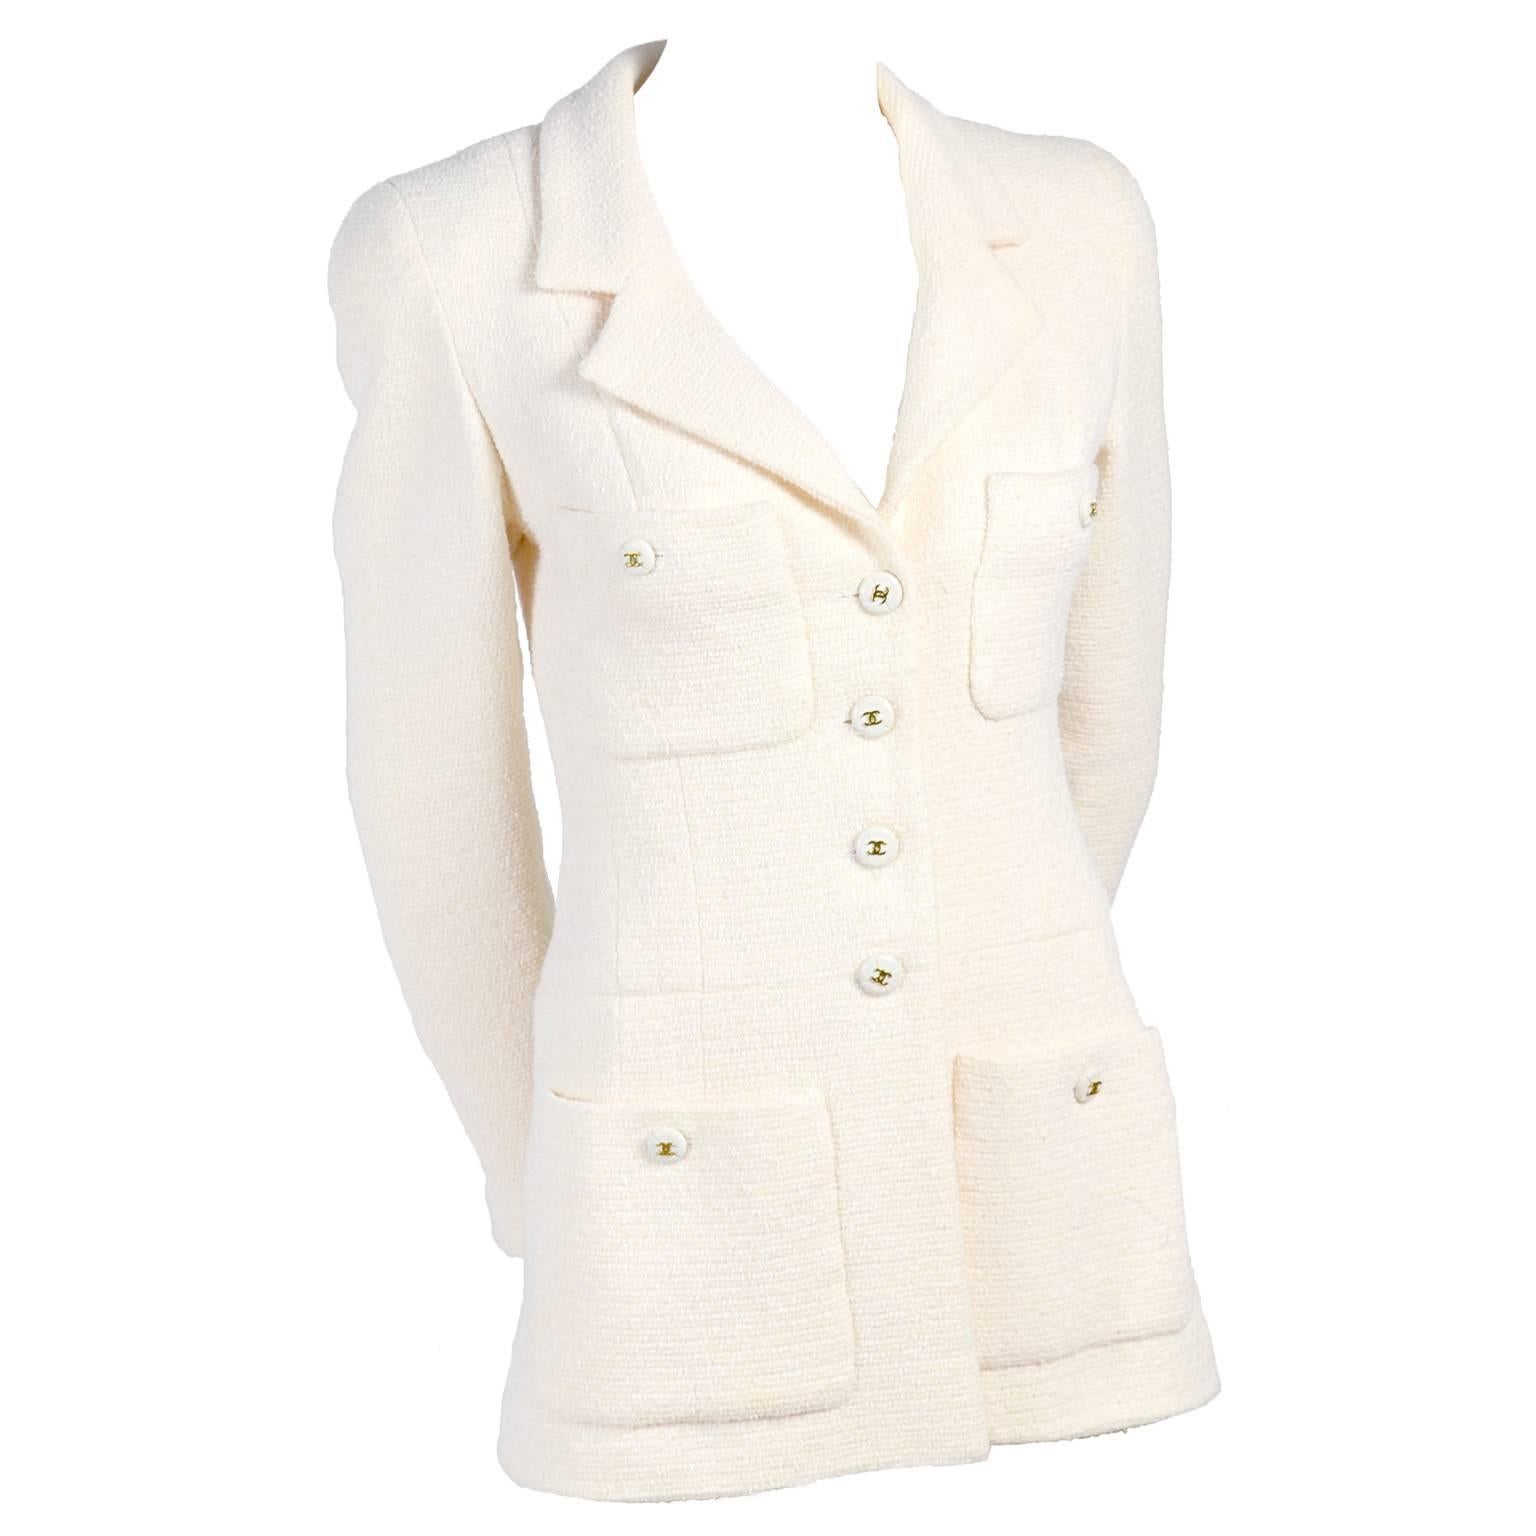 Chanel Creamy Ivory Tweed Wool Blazer Jacket with Logo Buttons and Silk Lining